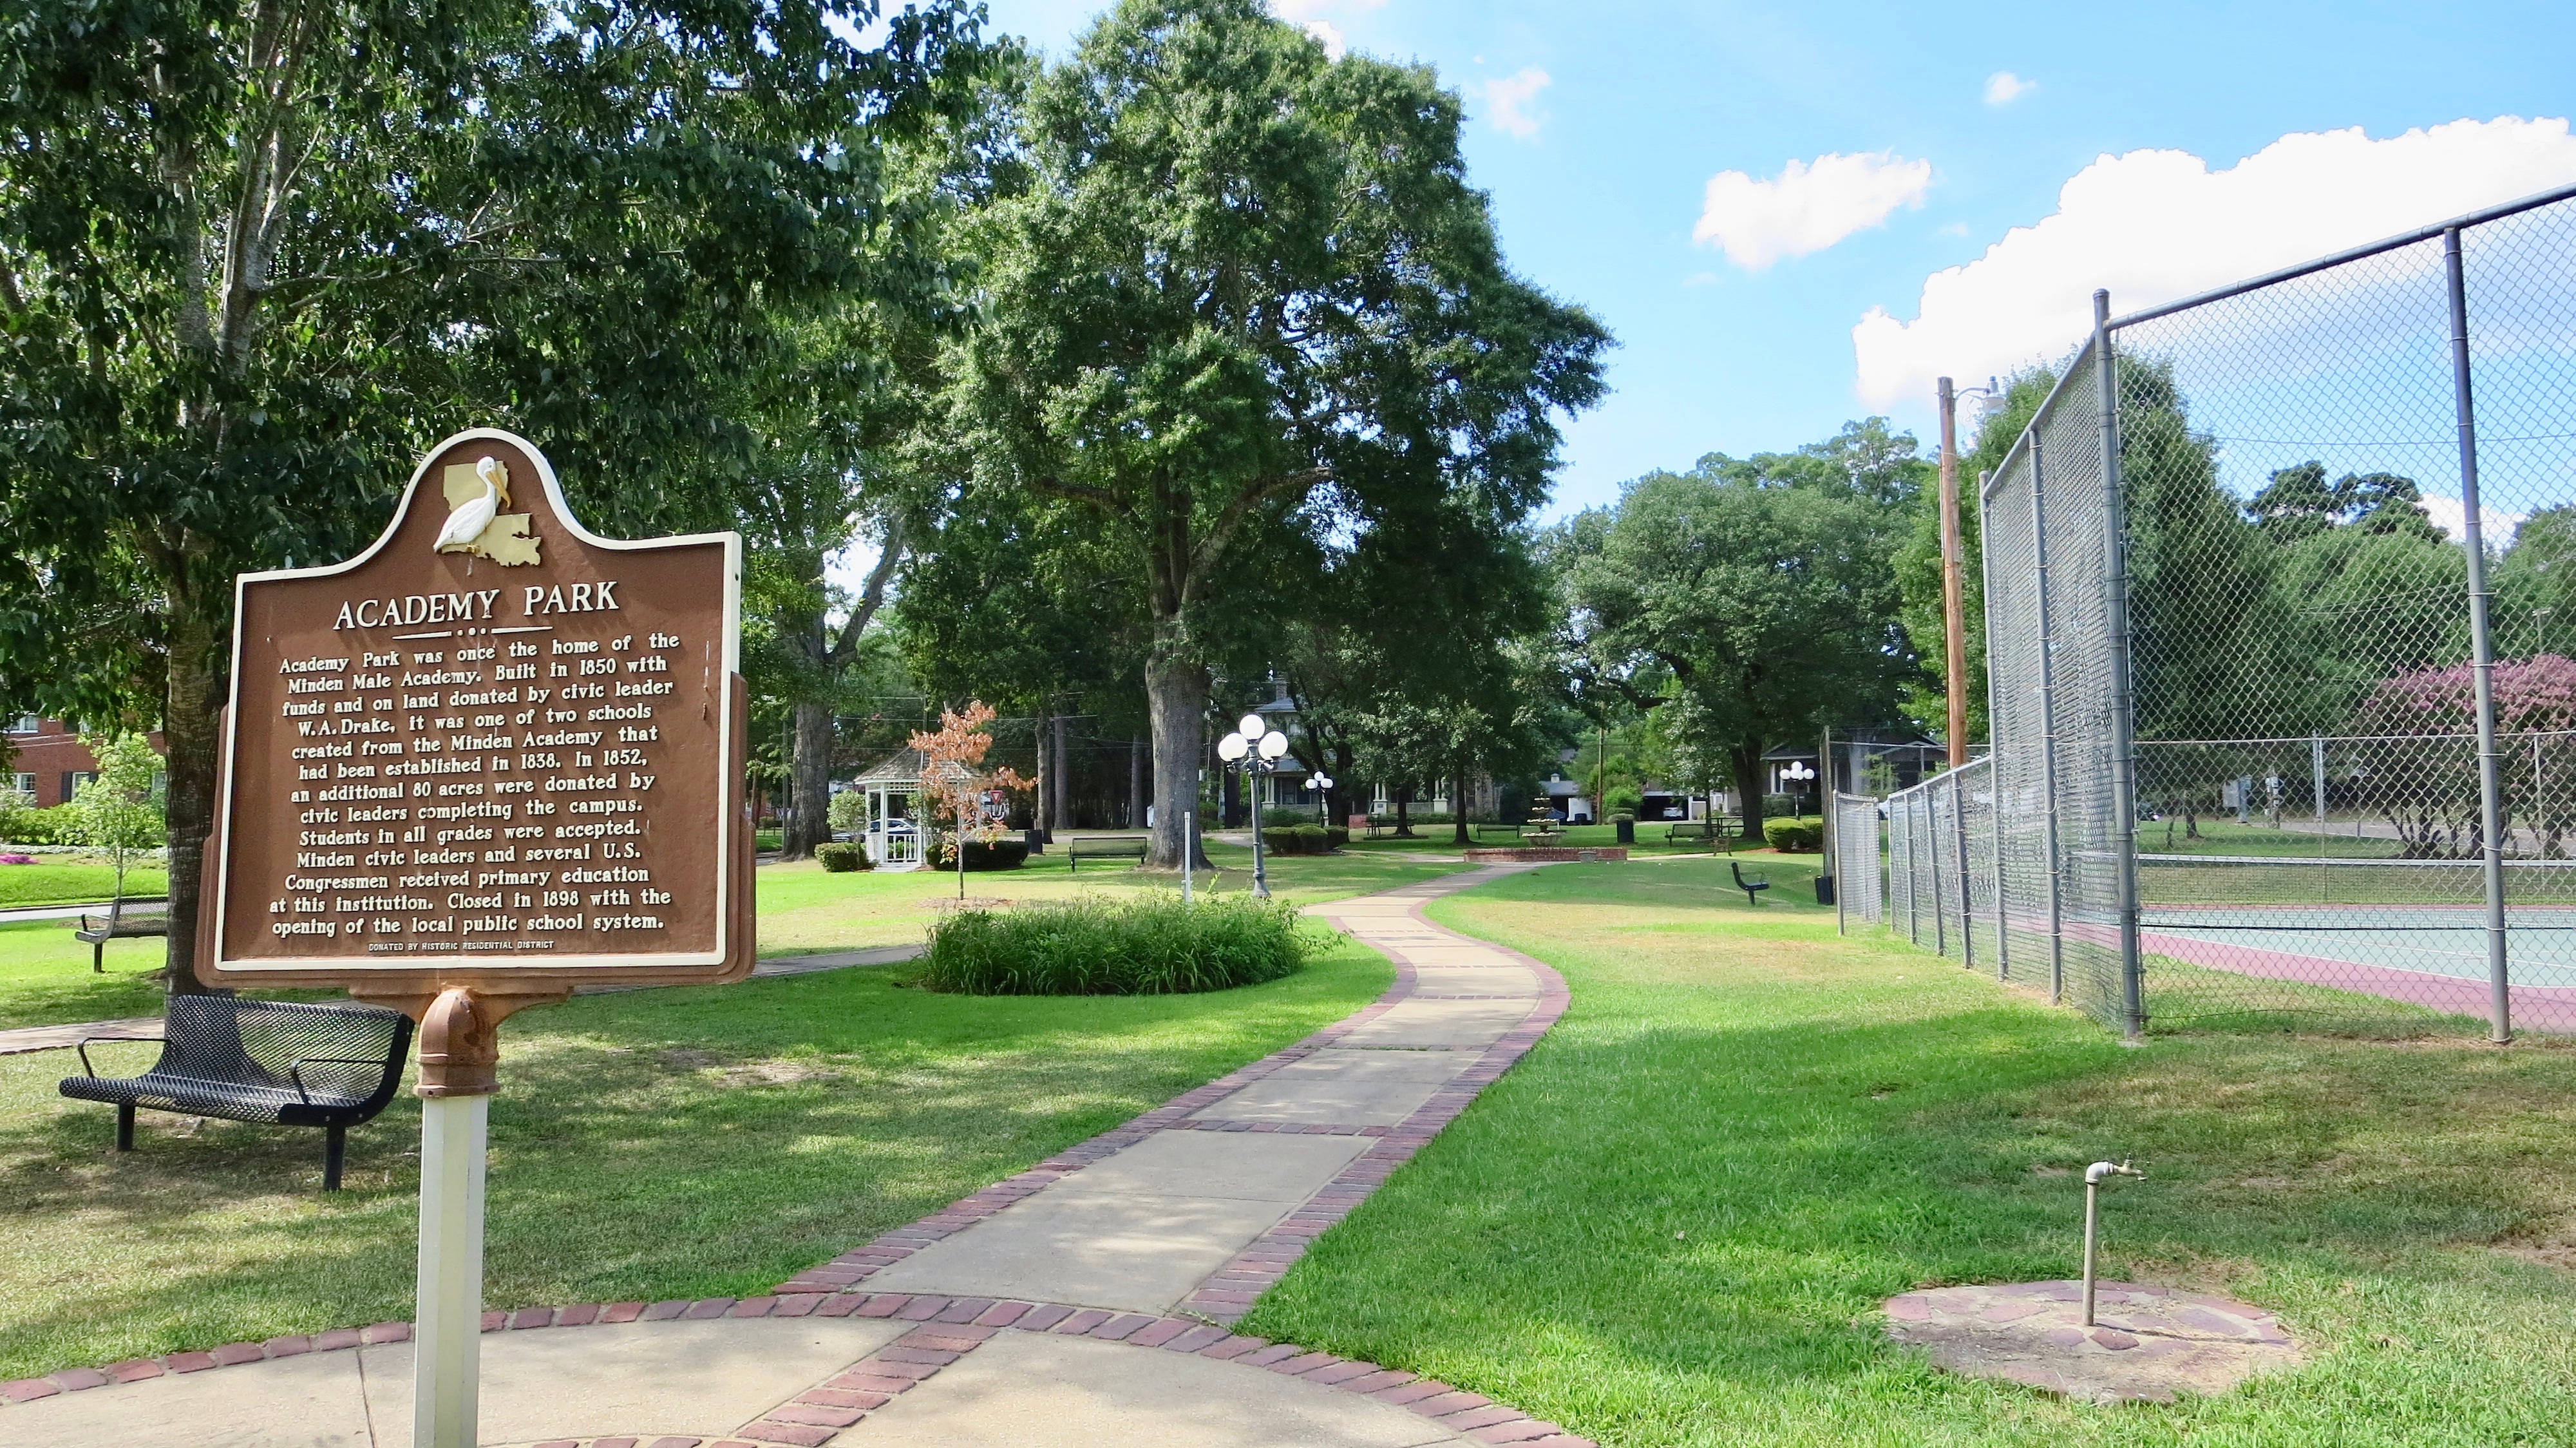 Academy Park and marker.